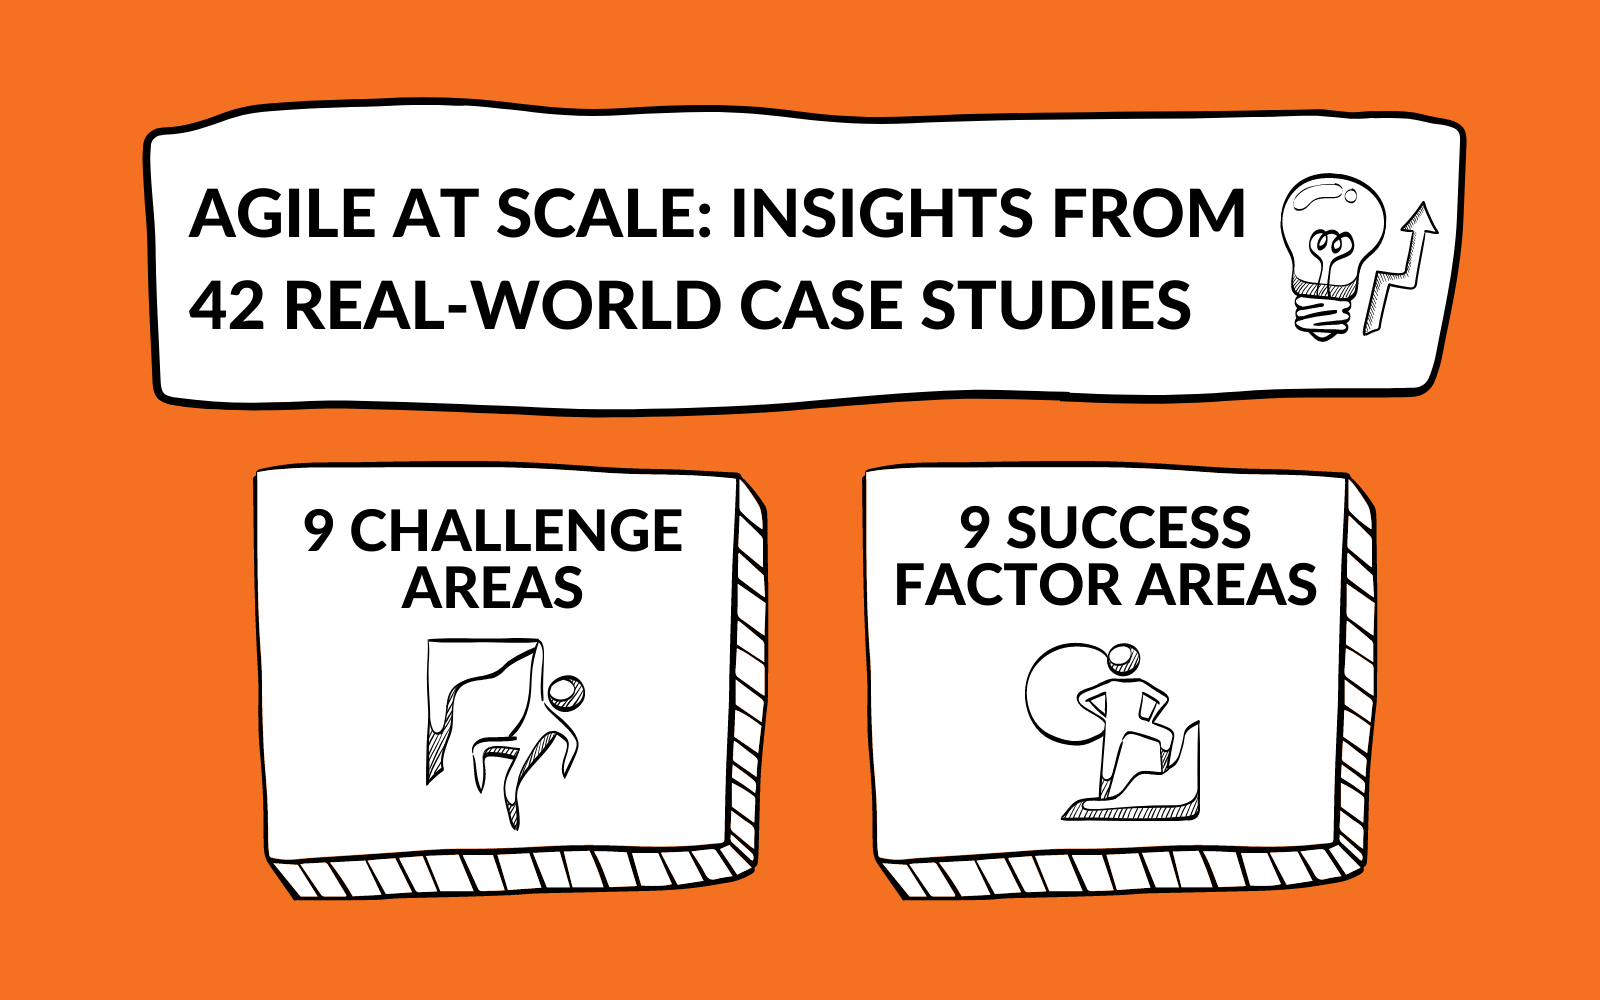 Agile-at-Scale-Insights-from-42-real-world-case-studies